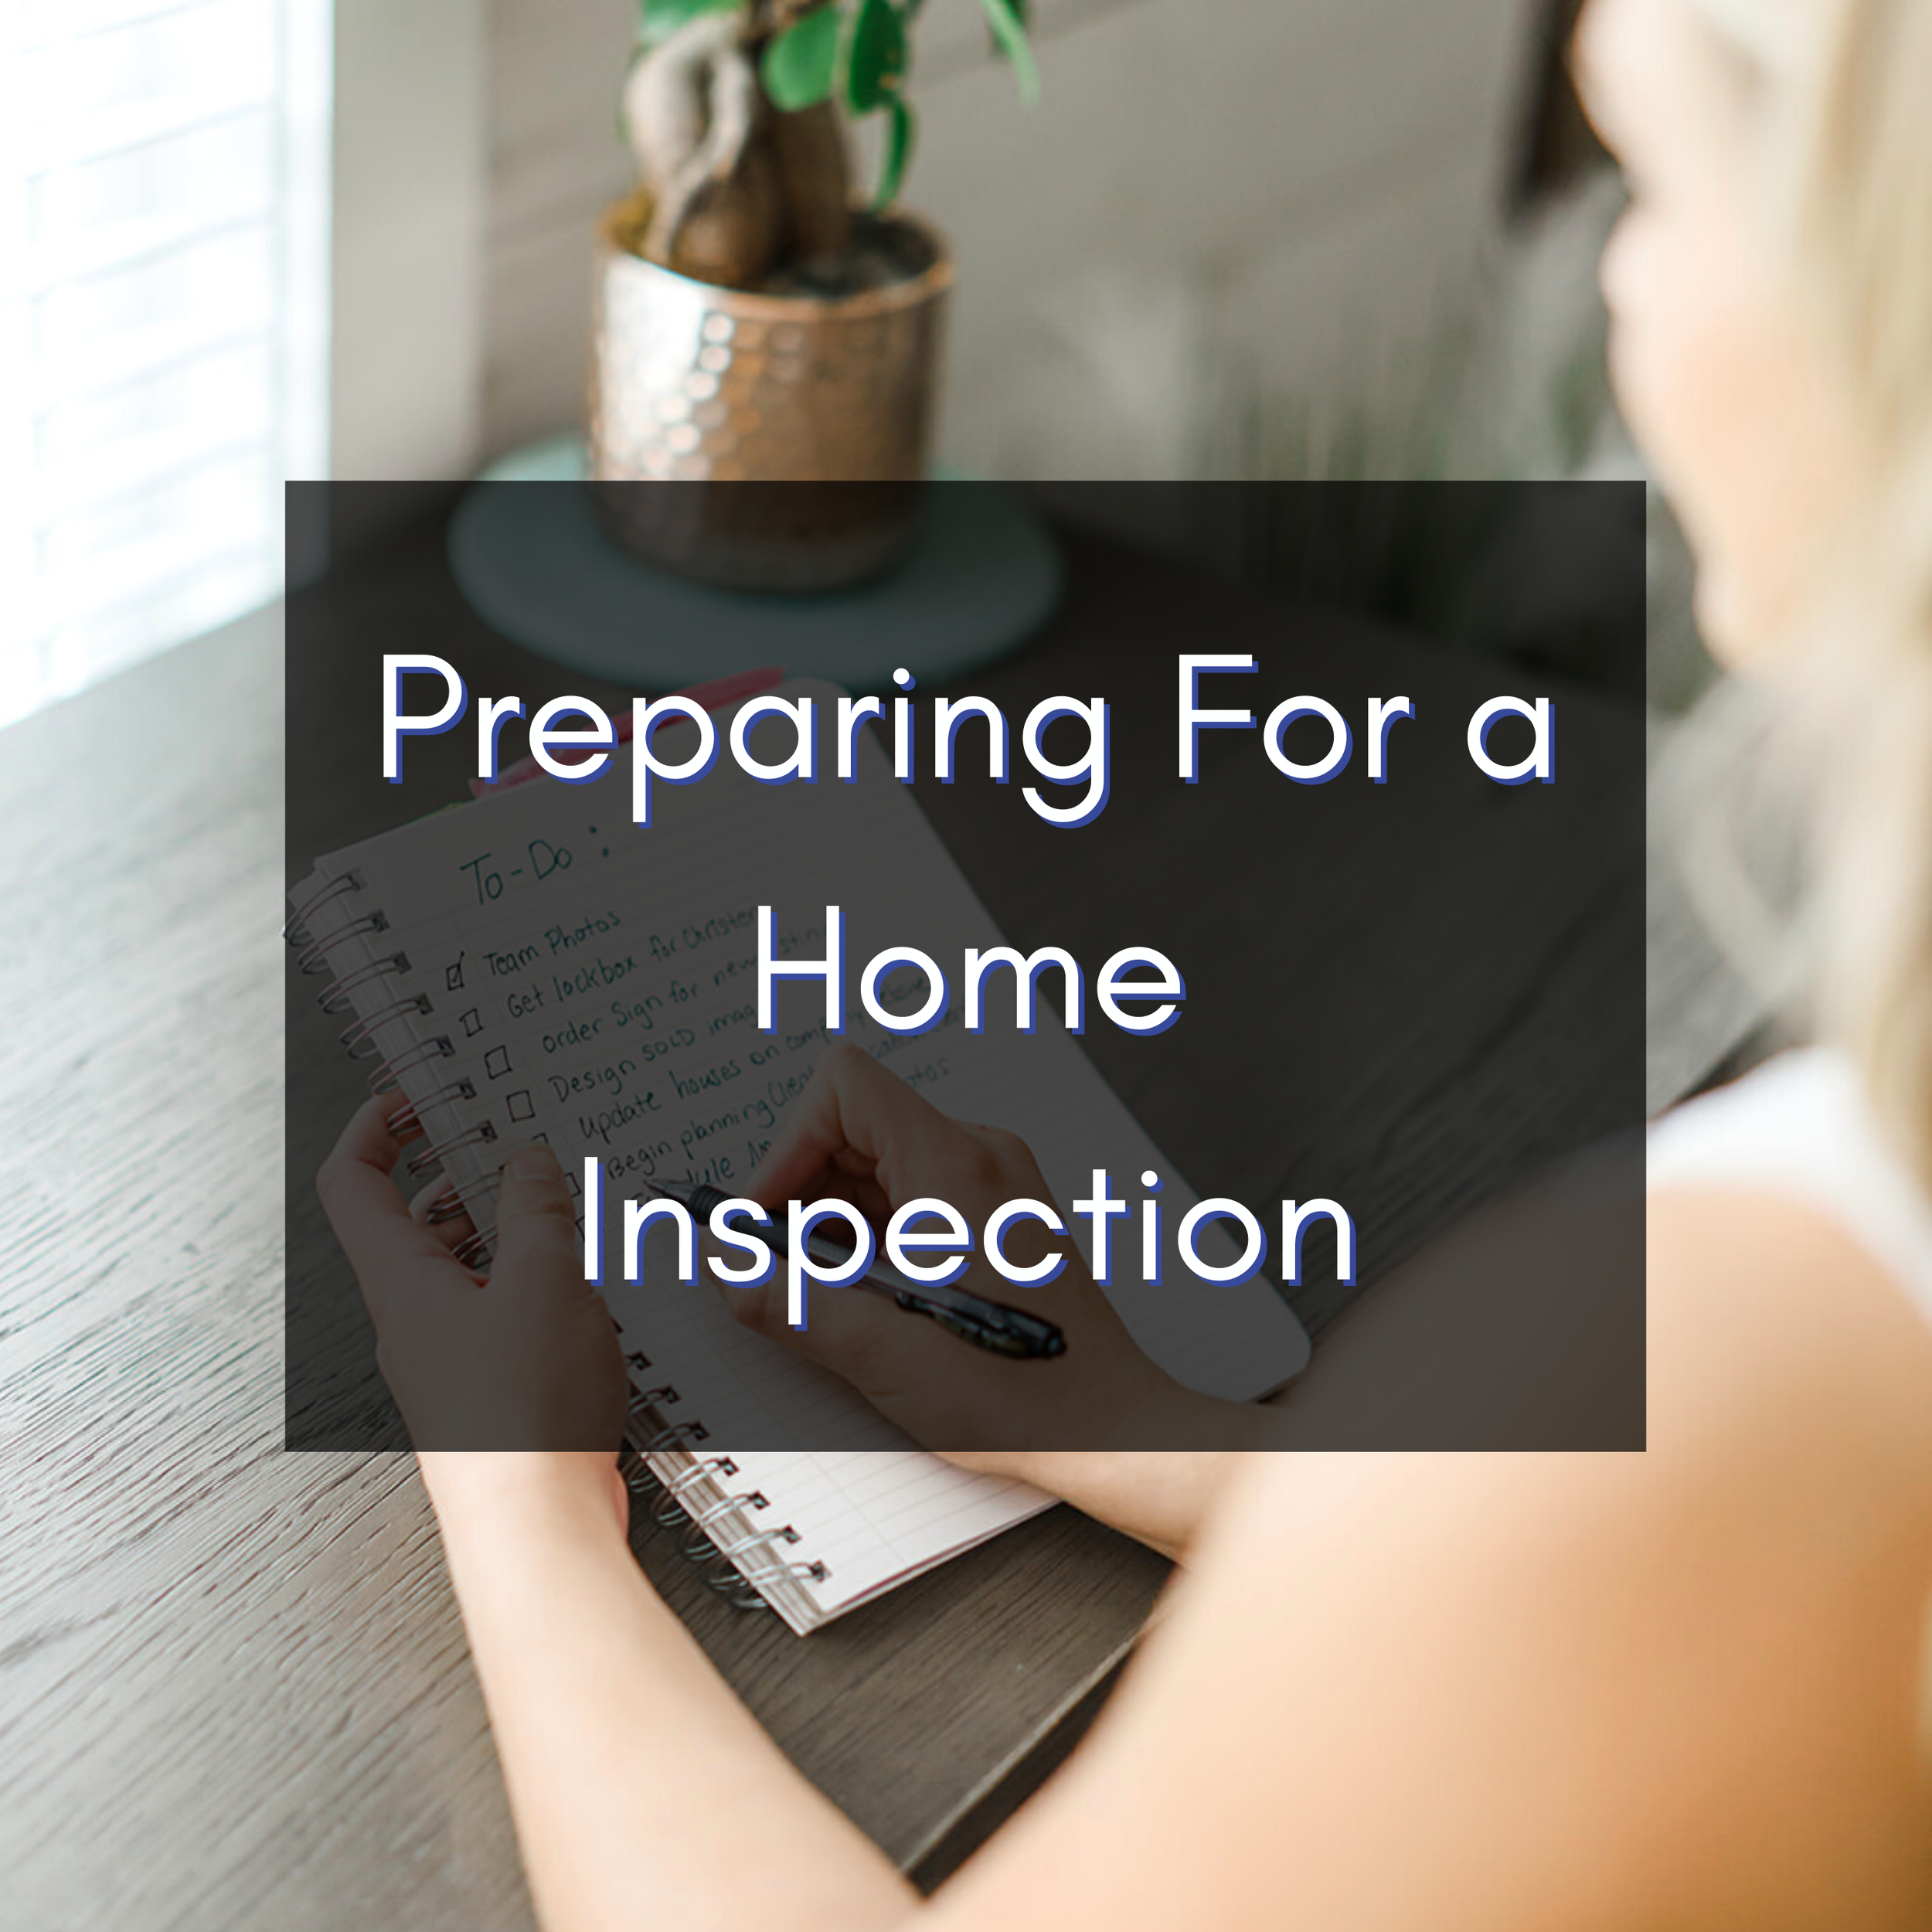 Preparing for a Home Inspection